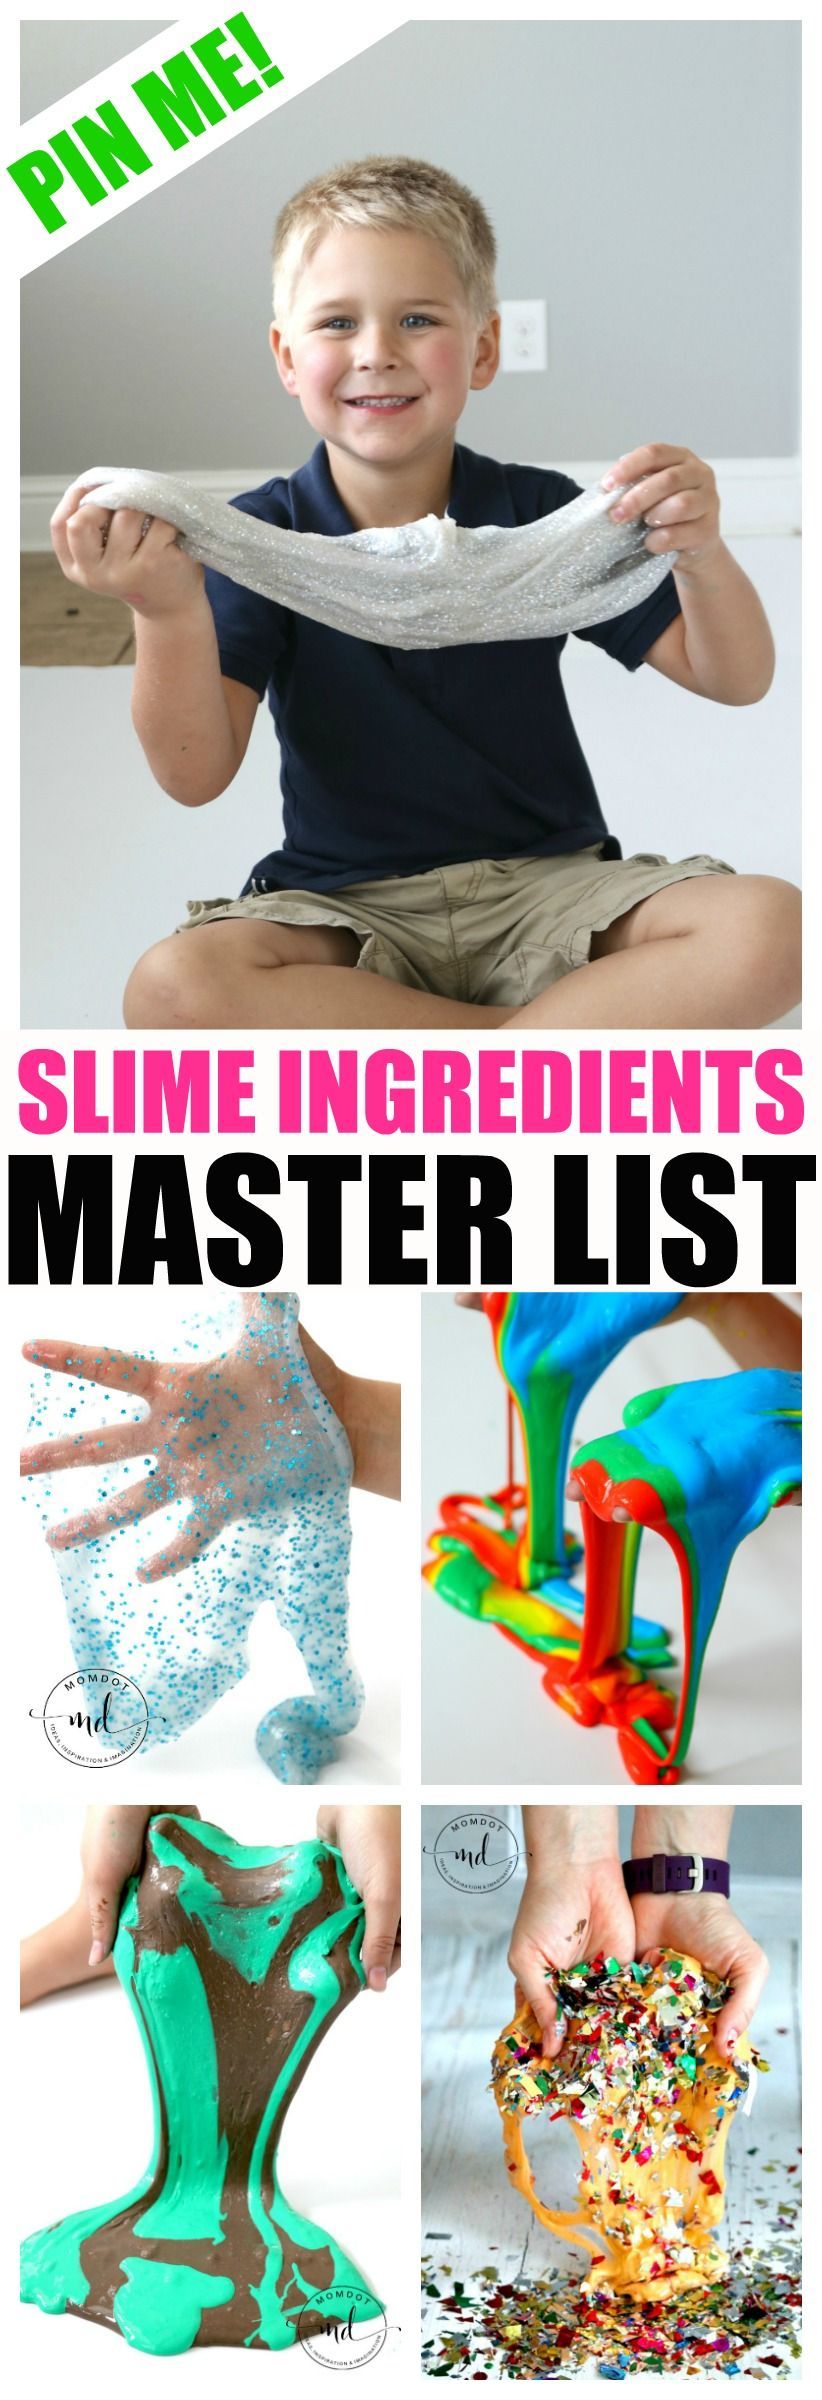 Slime Ingredients: Stocking up for Homemade Slime Recipes - Slime Ingredients: Stocking up for Homemade Slime Recipes -   19 diy Slime ingredients ideas